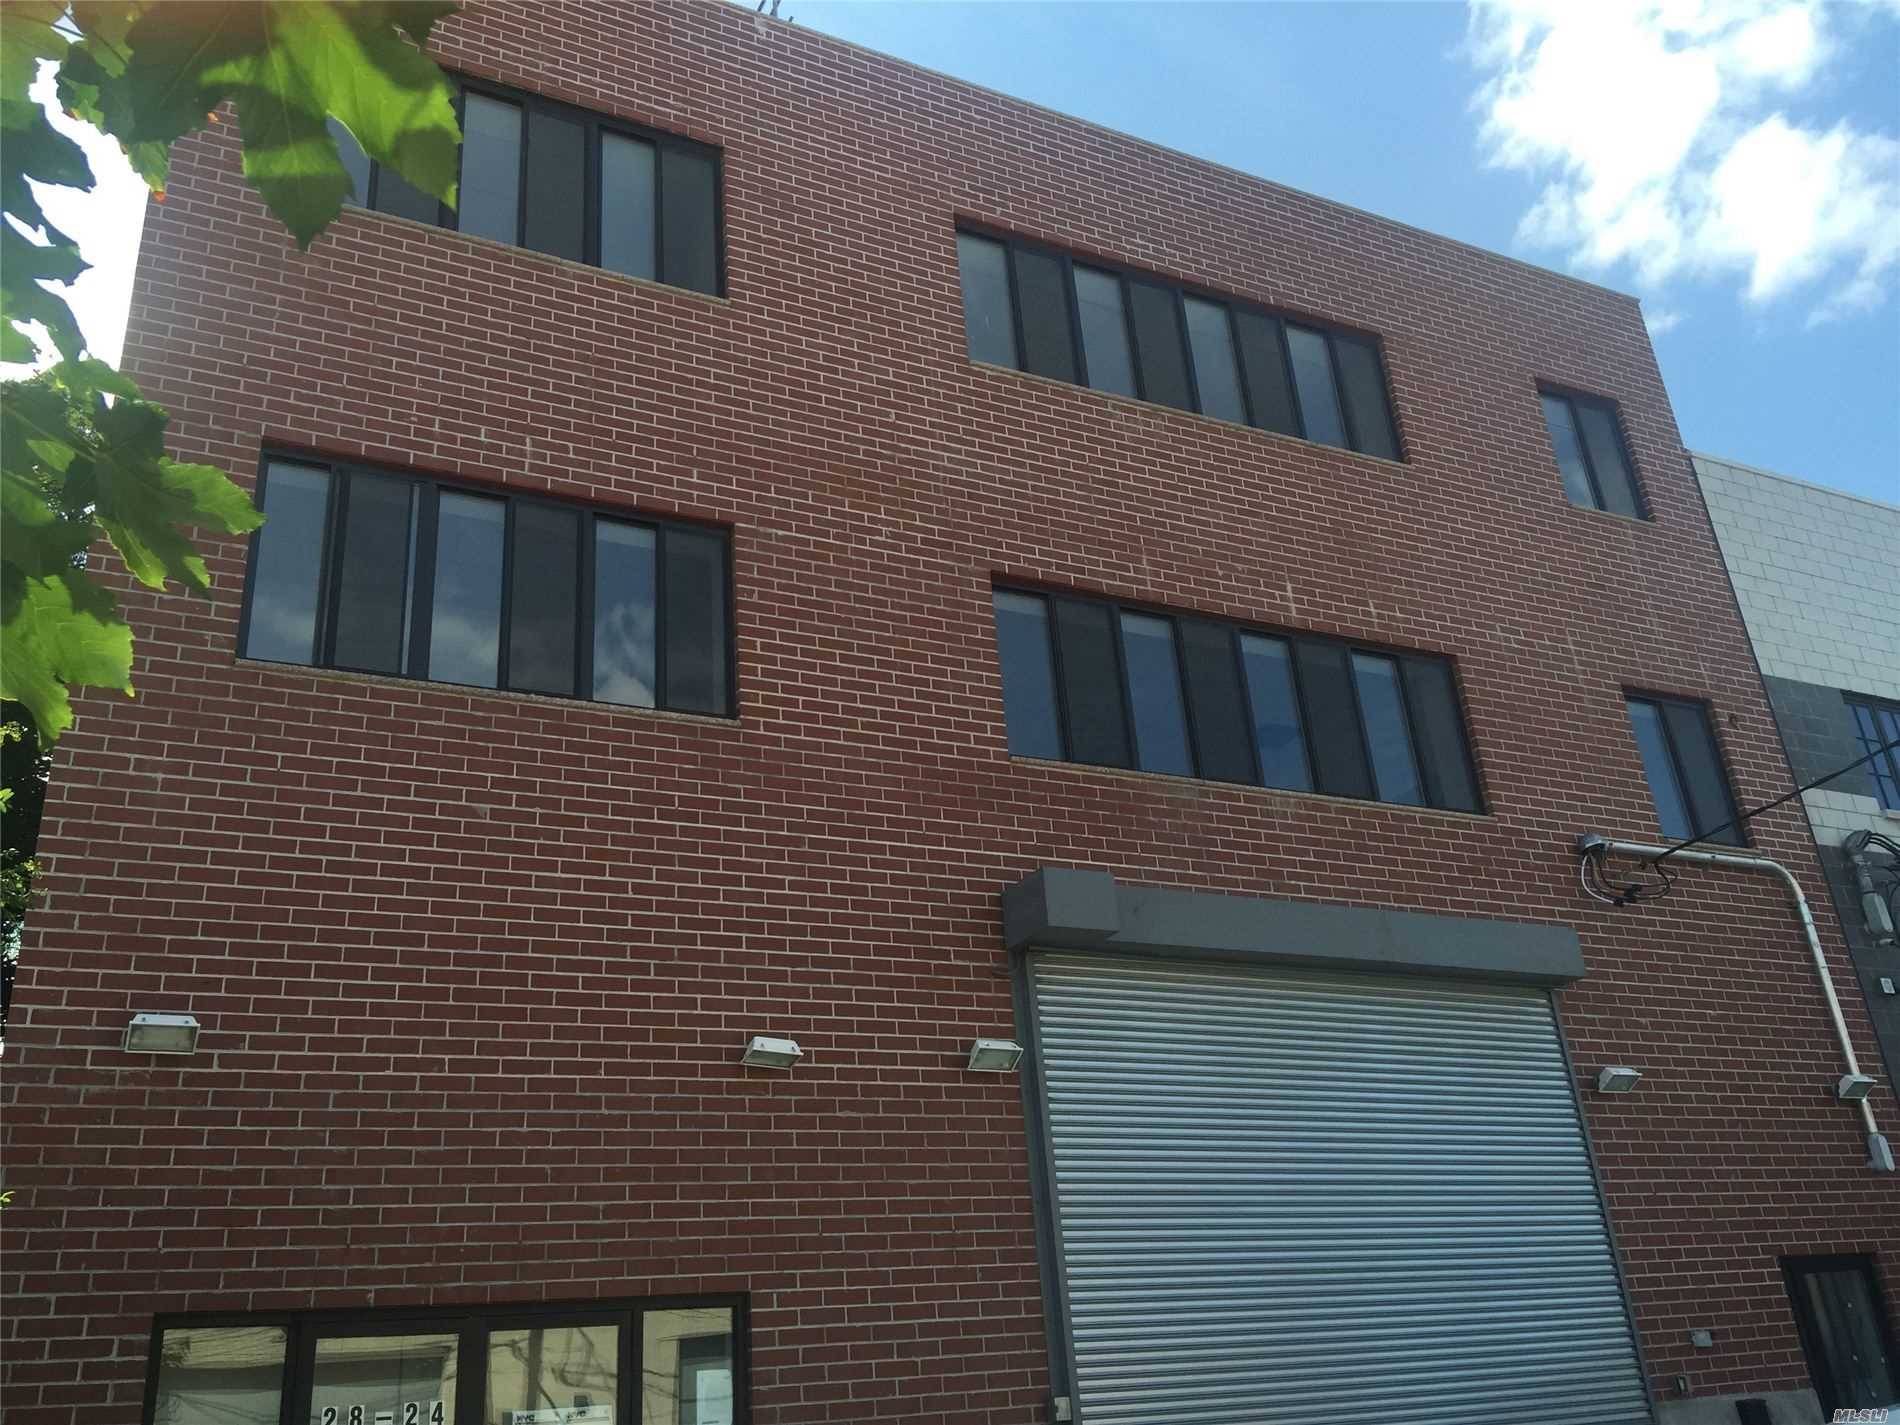 Brand New 2018 3 Storey Brick Building With Parking Lot.